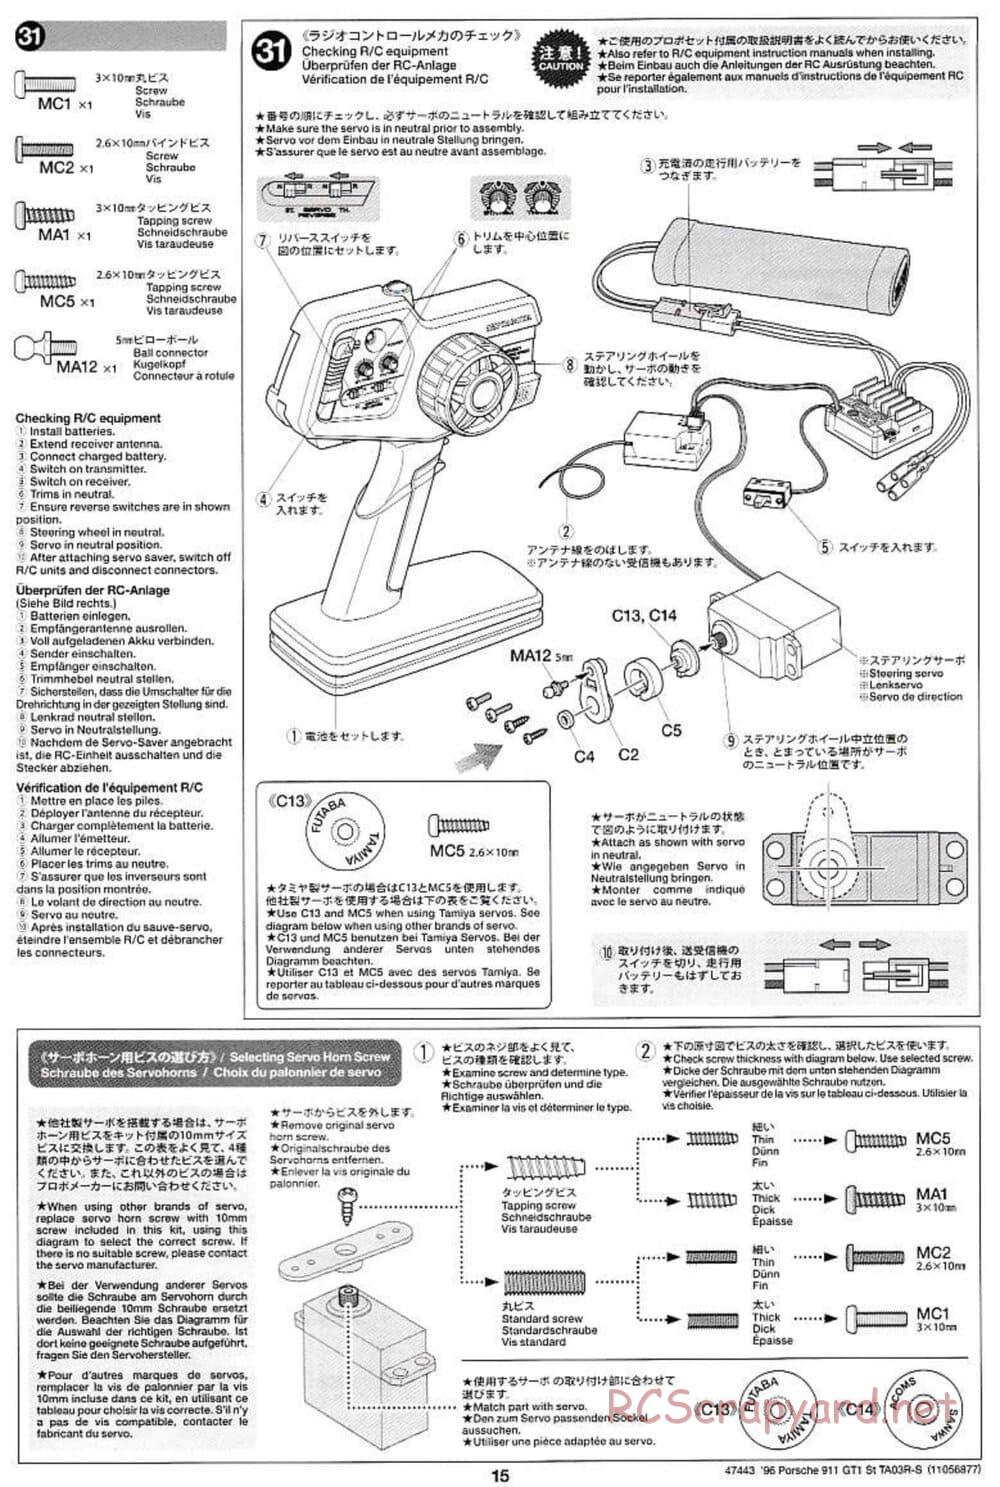 Tamiya - Porsche 911 GT1 Street - TA-03RS Chassis - Manual - Page 15